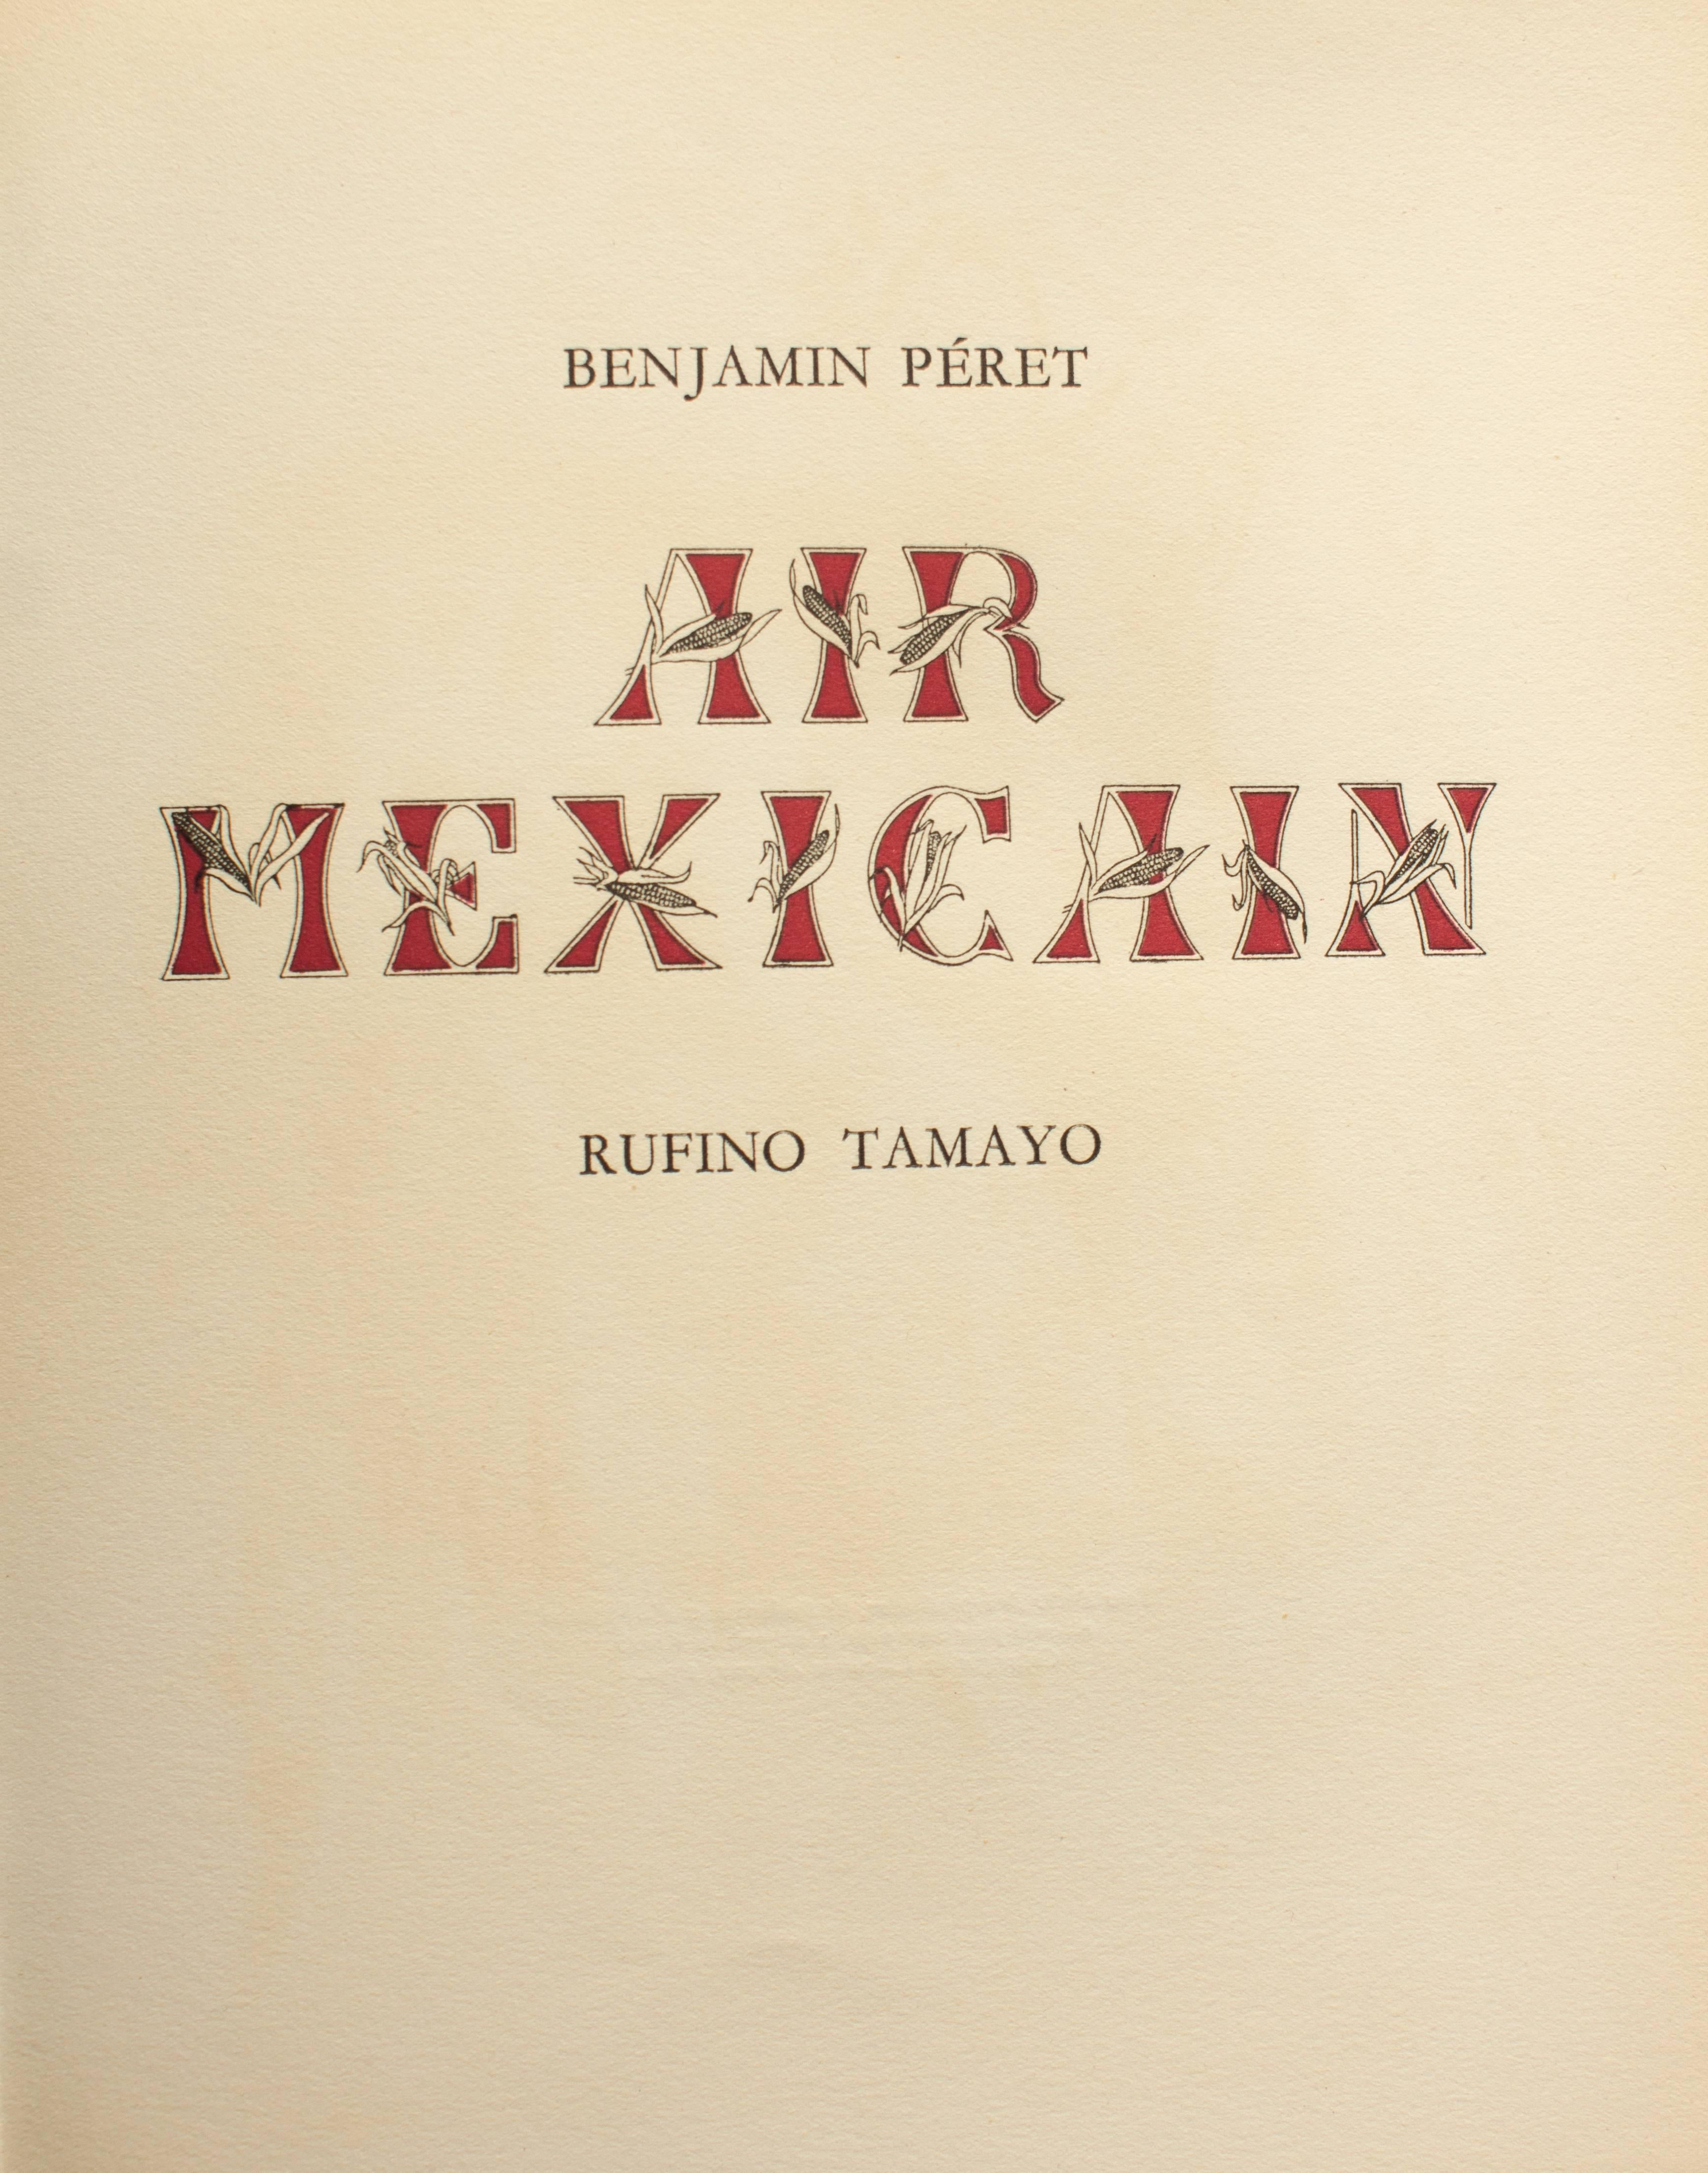 Edition of 274 copies copies including 4 original colour lithographs by Rufino Tamayo. Copy on B.F.K.Rives, in perfect conditions and uncut.
Original editorial softcover.
Peret's hommage to Mexico, enriched by 4 beautiful illustrations by the